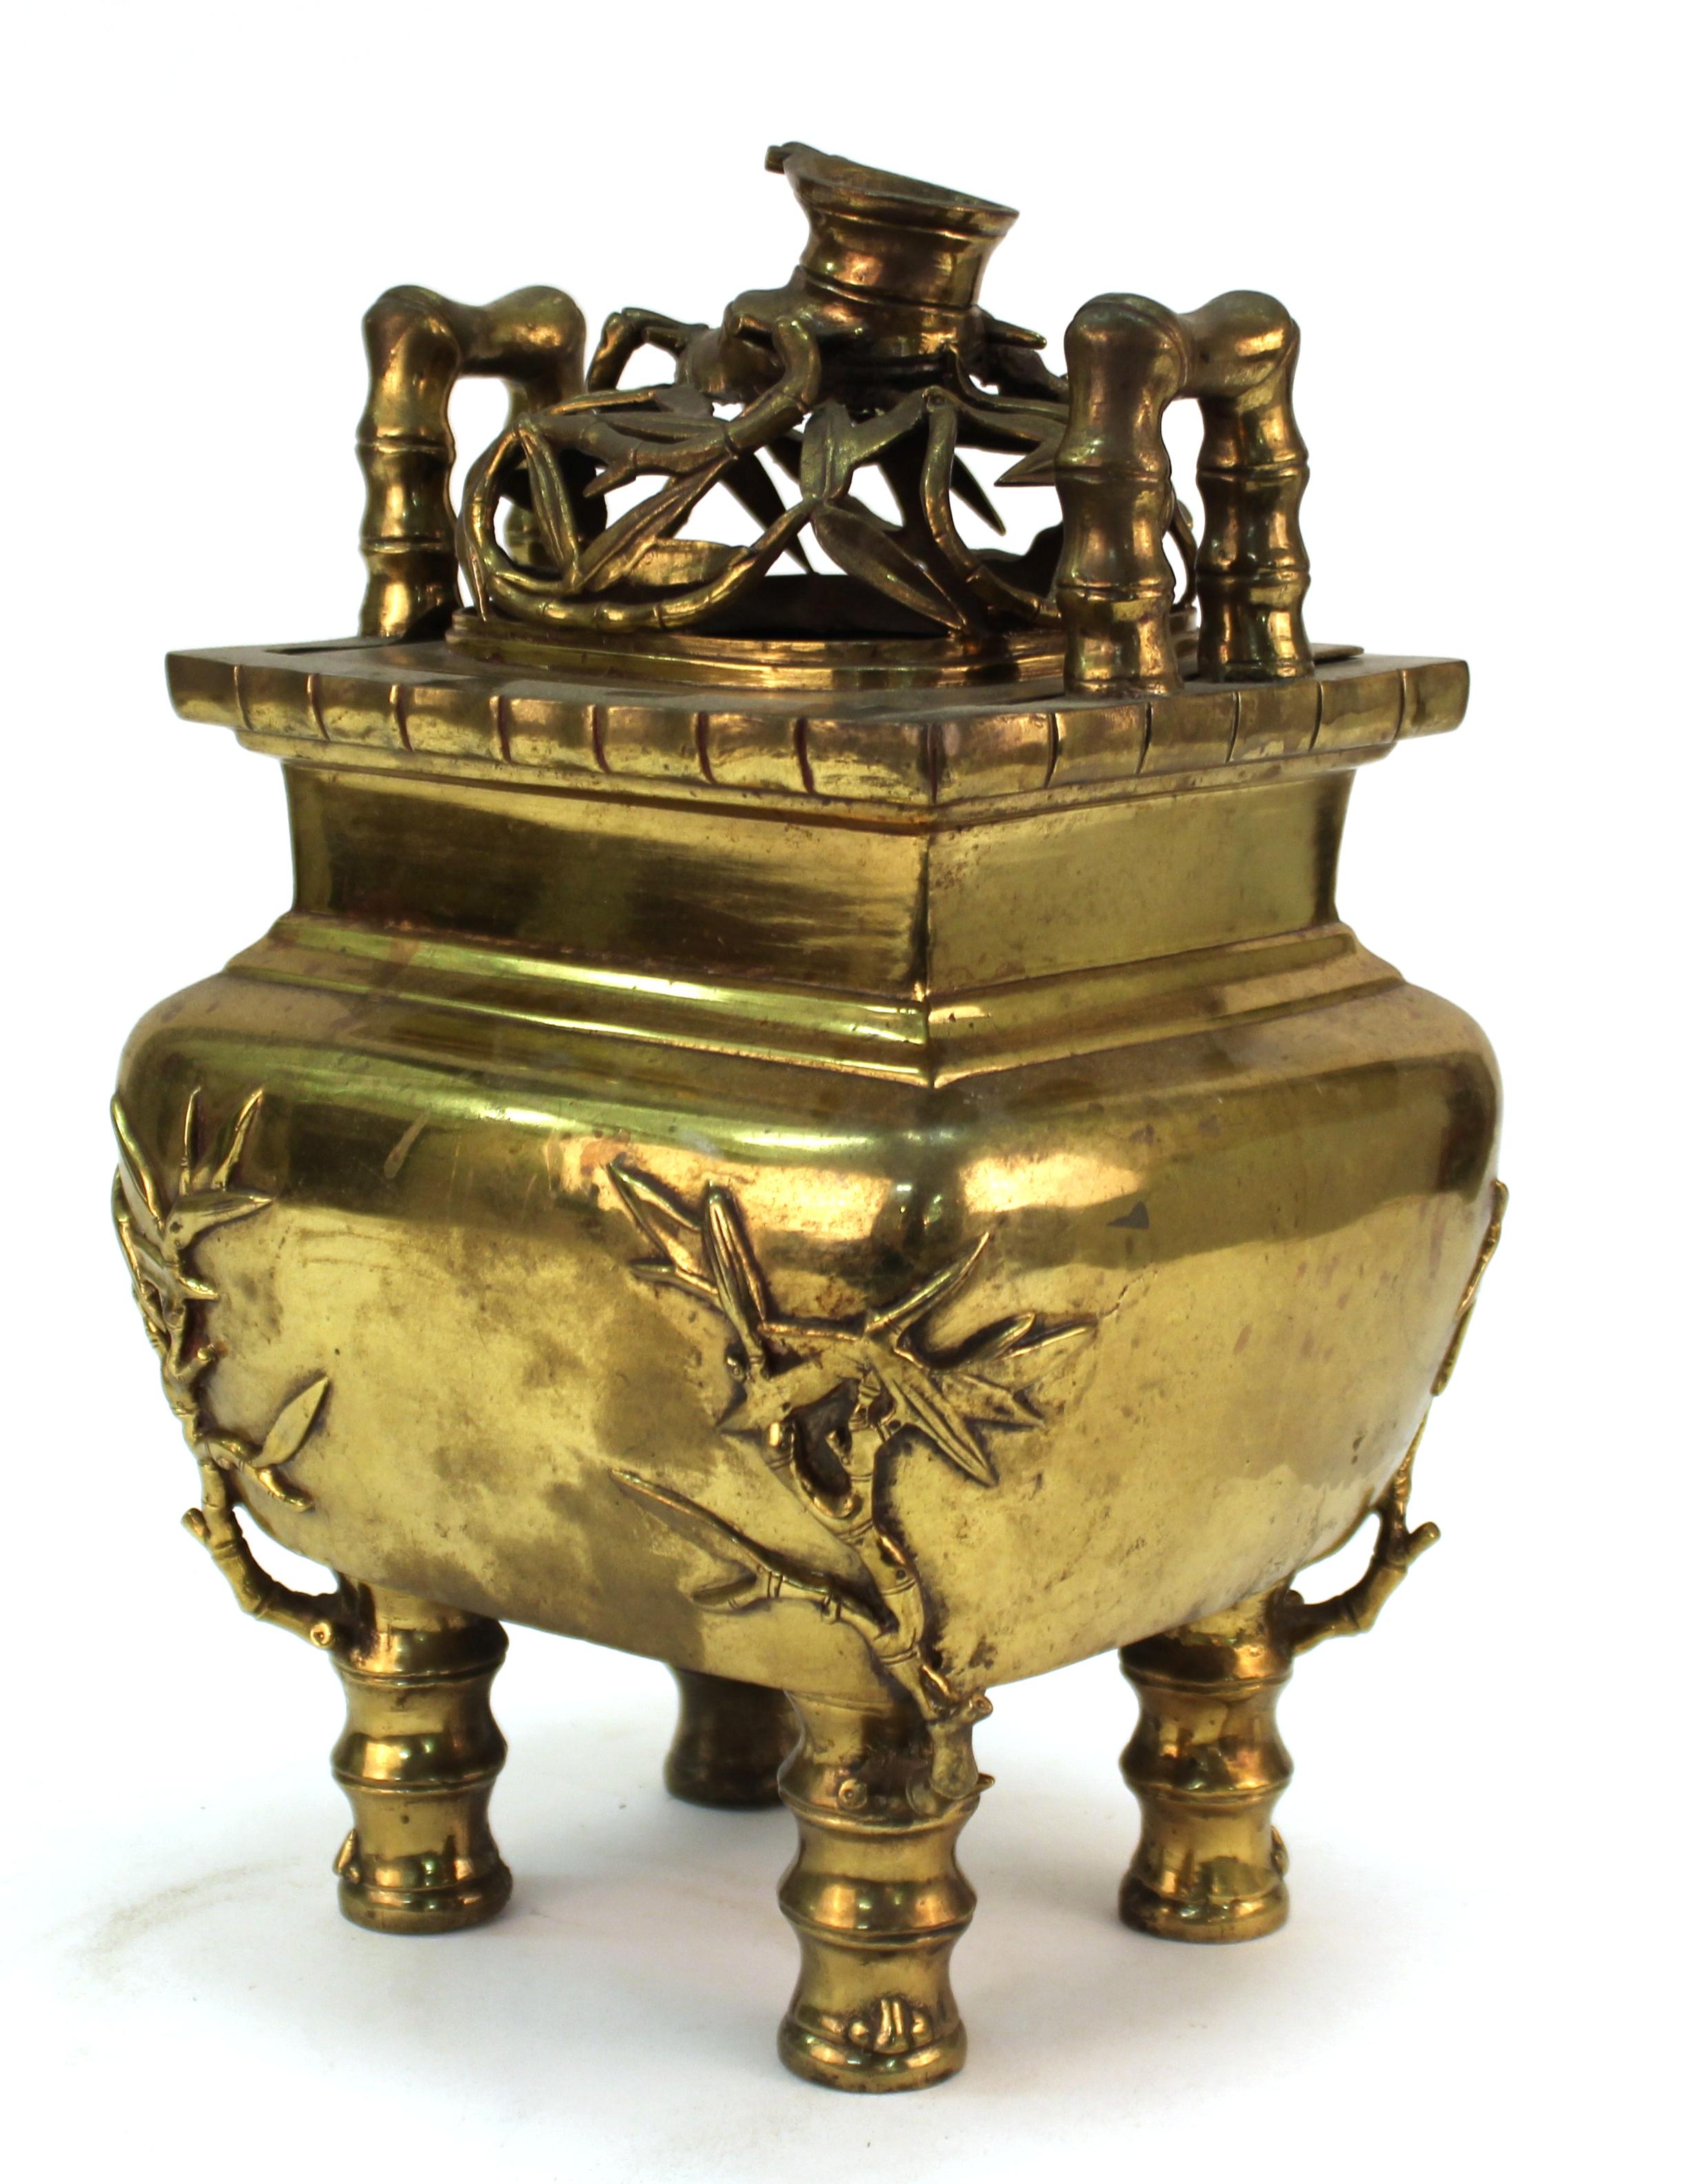 Chinese temple incense burner in gilt brass with a removable top lid and a bamboo motif. The piece has a square section of the lower part missing but remains in good vintage condition with age-appropriate wear to the metal. The original patina has